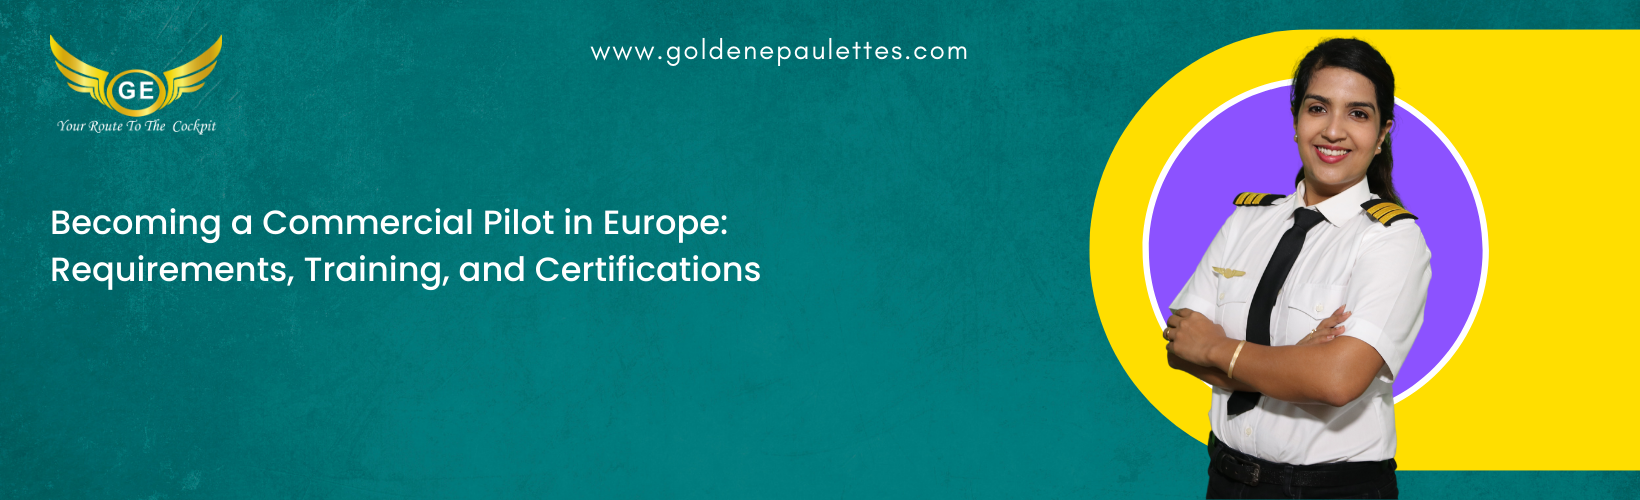 The Qualifications for Becoming a Commercial Pilot in Europe – A look at the qualifications necessary to become a commercial pilot in Europe, such as the necessary training and certifications. (Reference